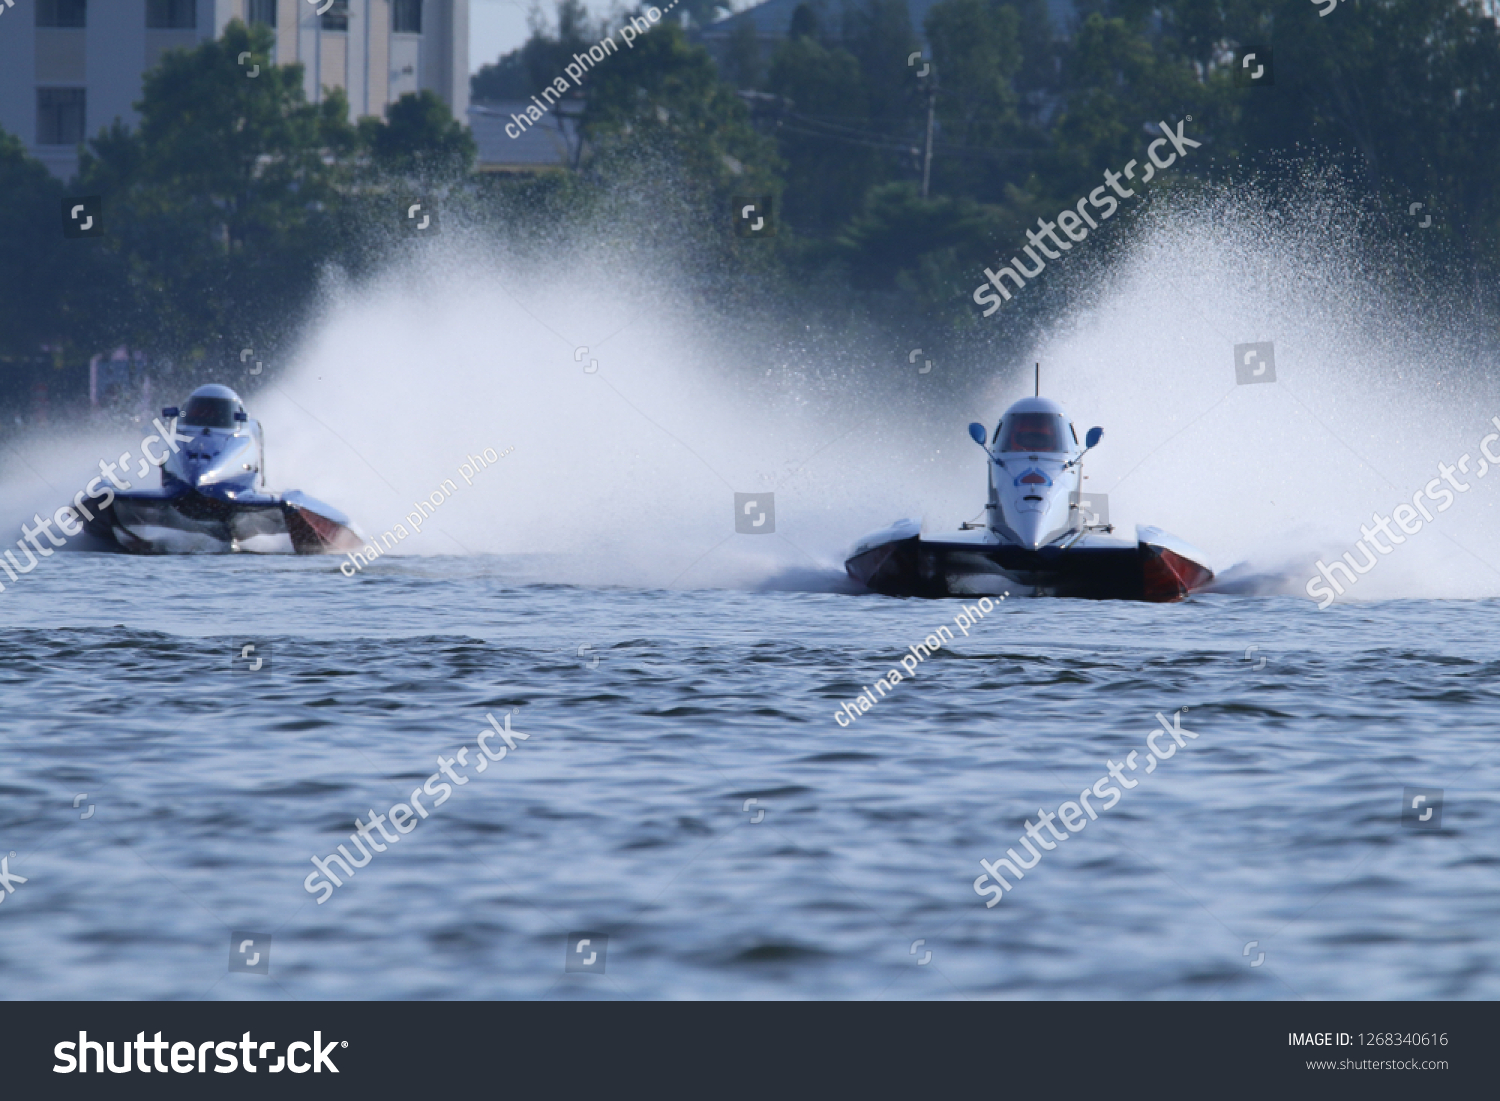 KHONKAEN,THAILAND - November 24:One of the participants in action at "Singha F1 Powerboat Thailand 2018",Bueng Nong Kho Pond ,KhonKaen,November 24, 2018. KhonKaen, Thailand. #1268340616